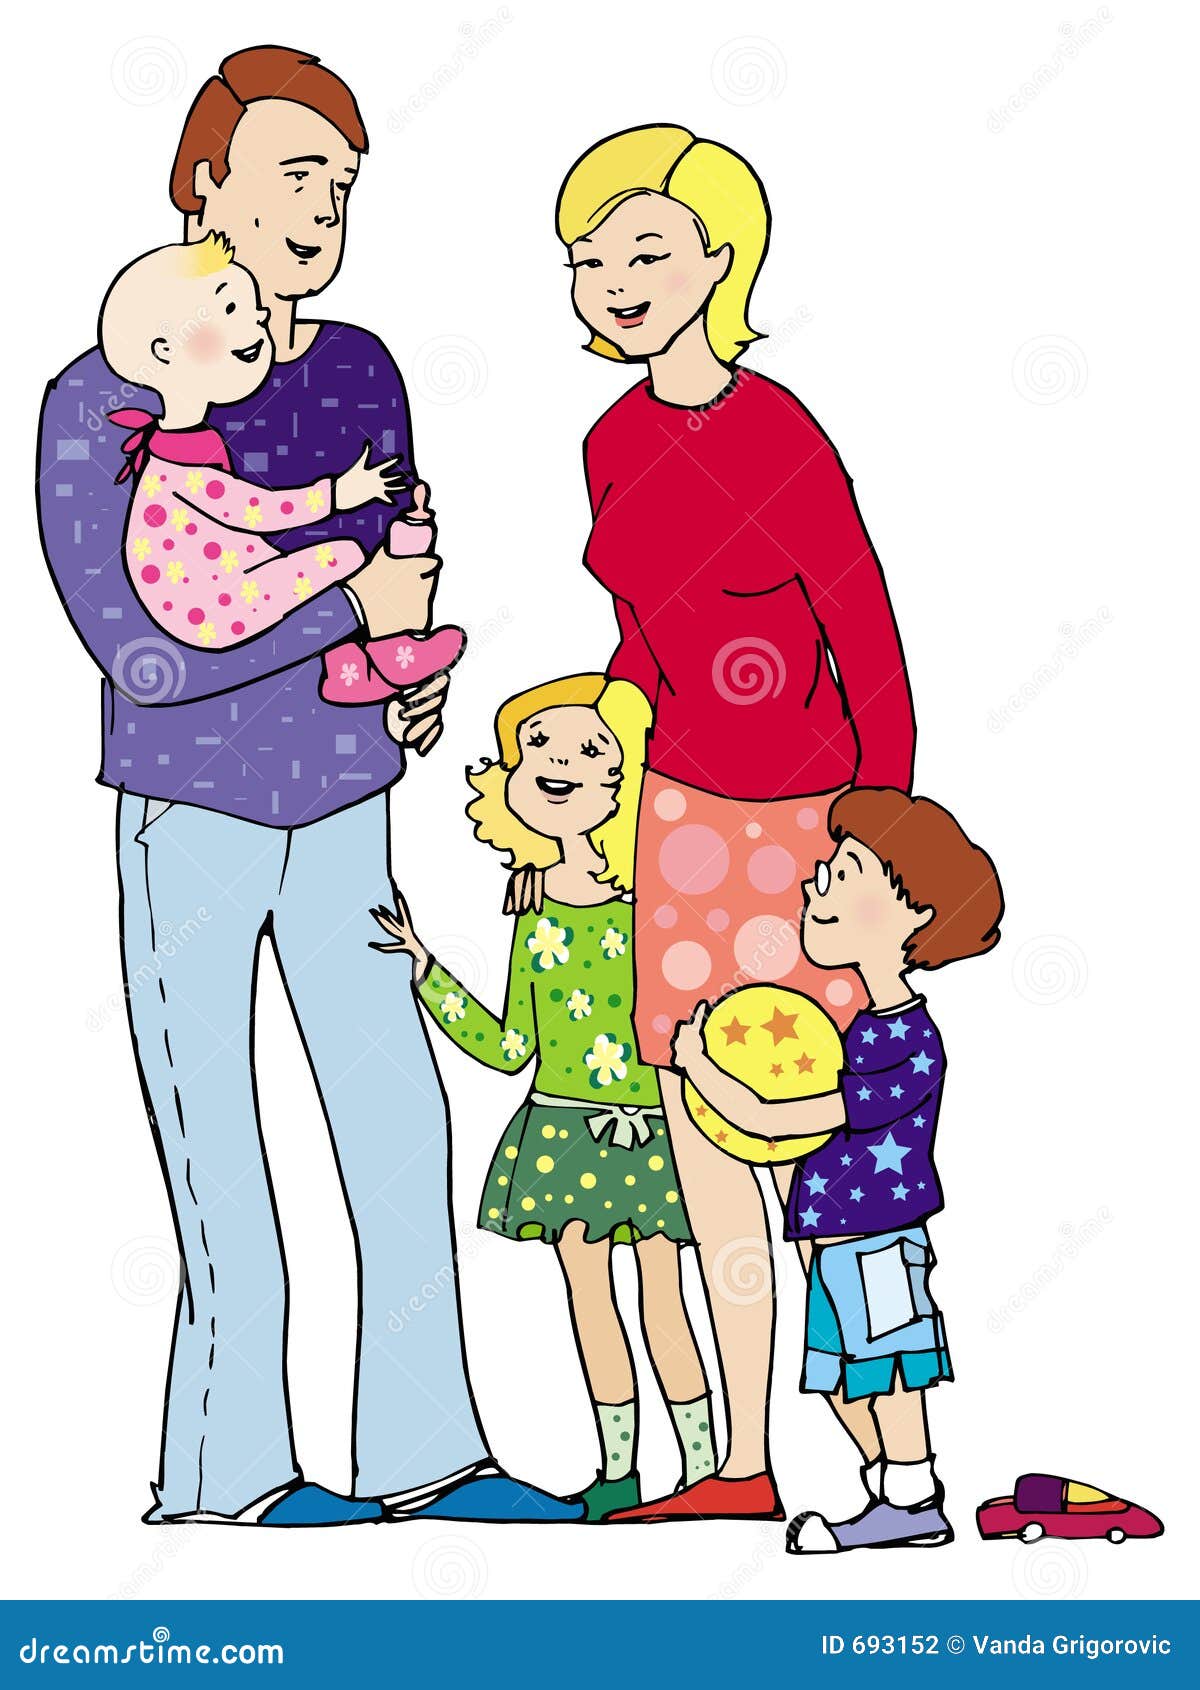 clipart of nuclear family - photo #17